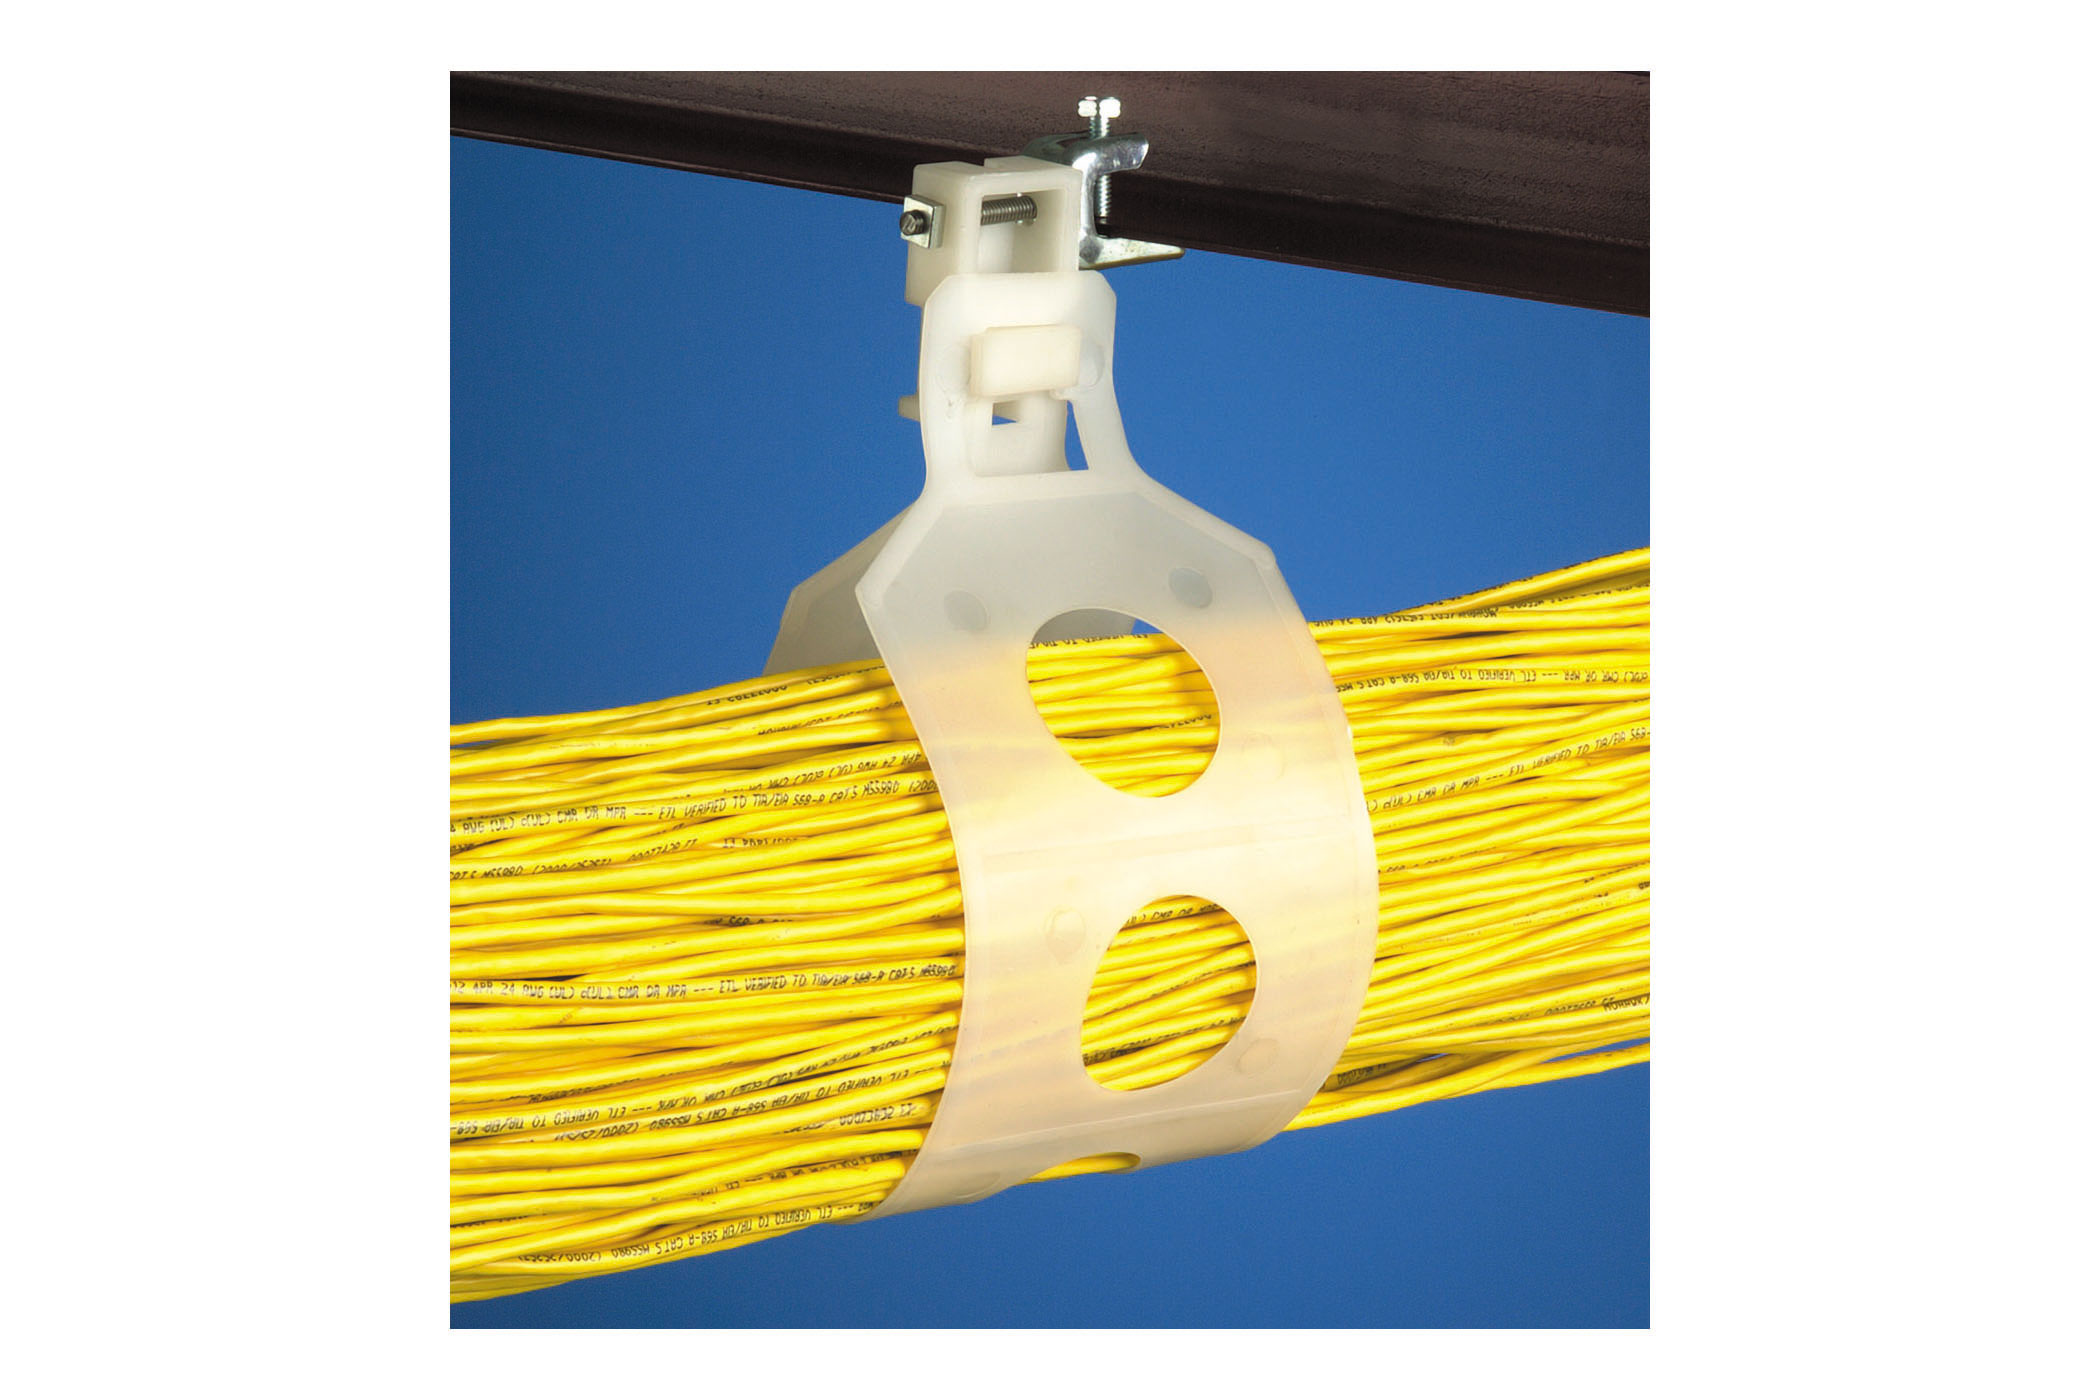 Clear cable hanger holding up yellow cables against a blue background. Image by Arlington Industries.